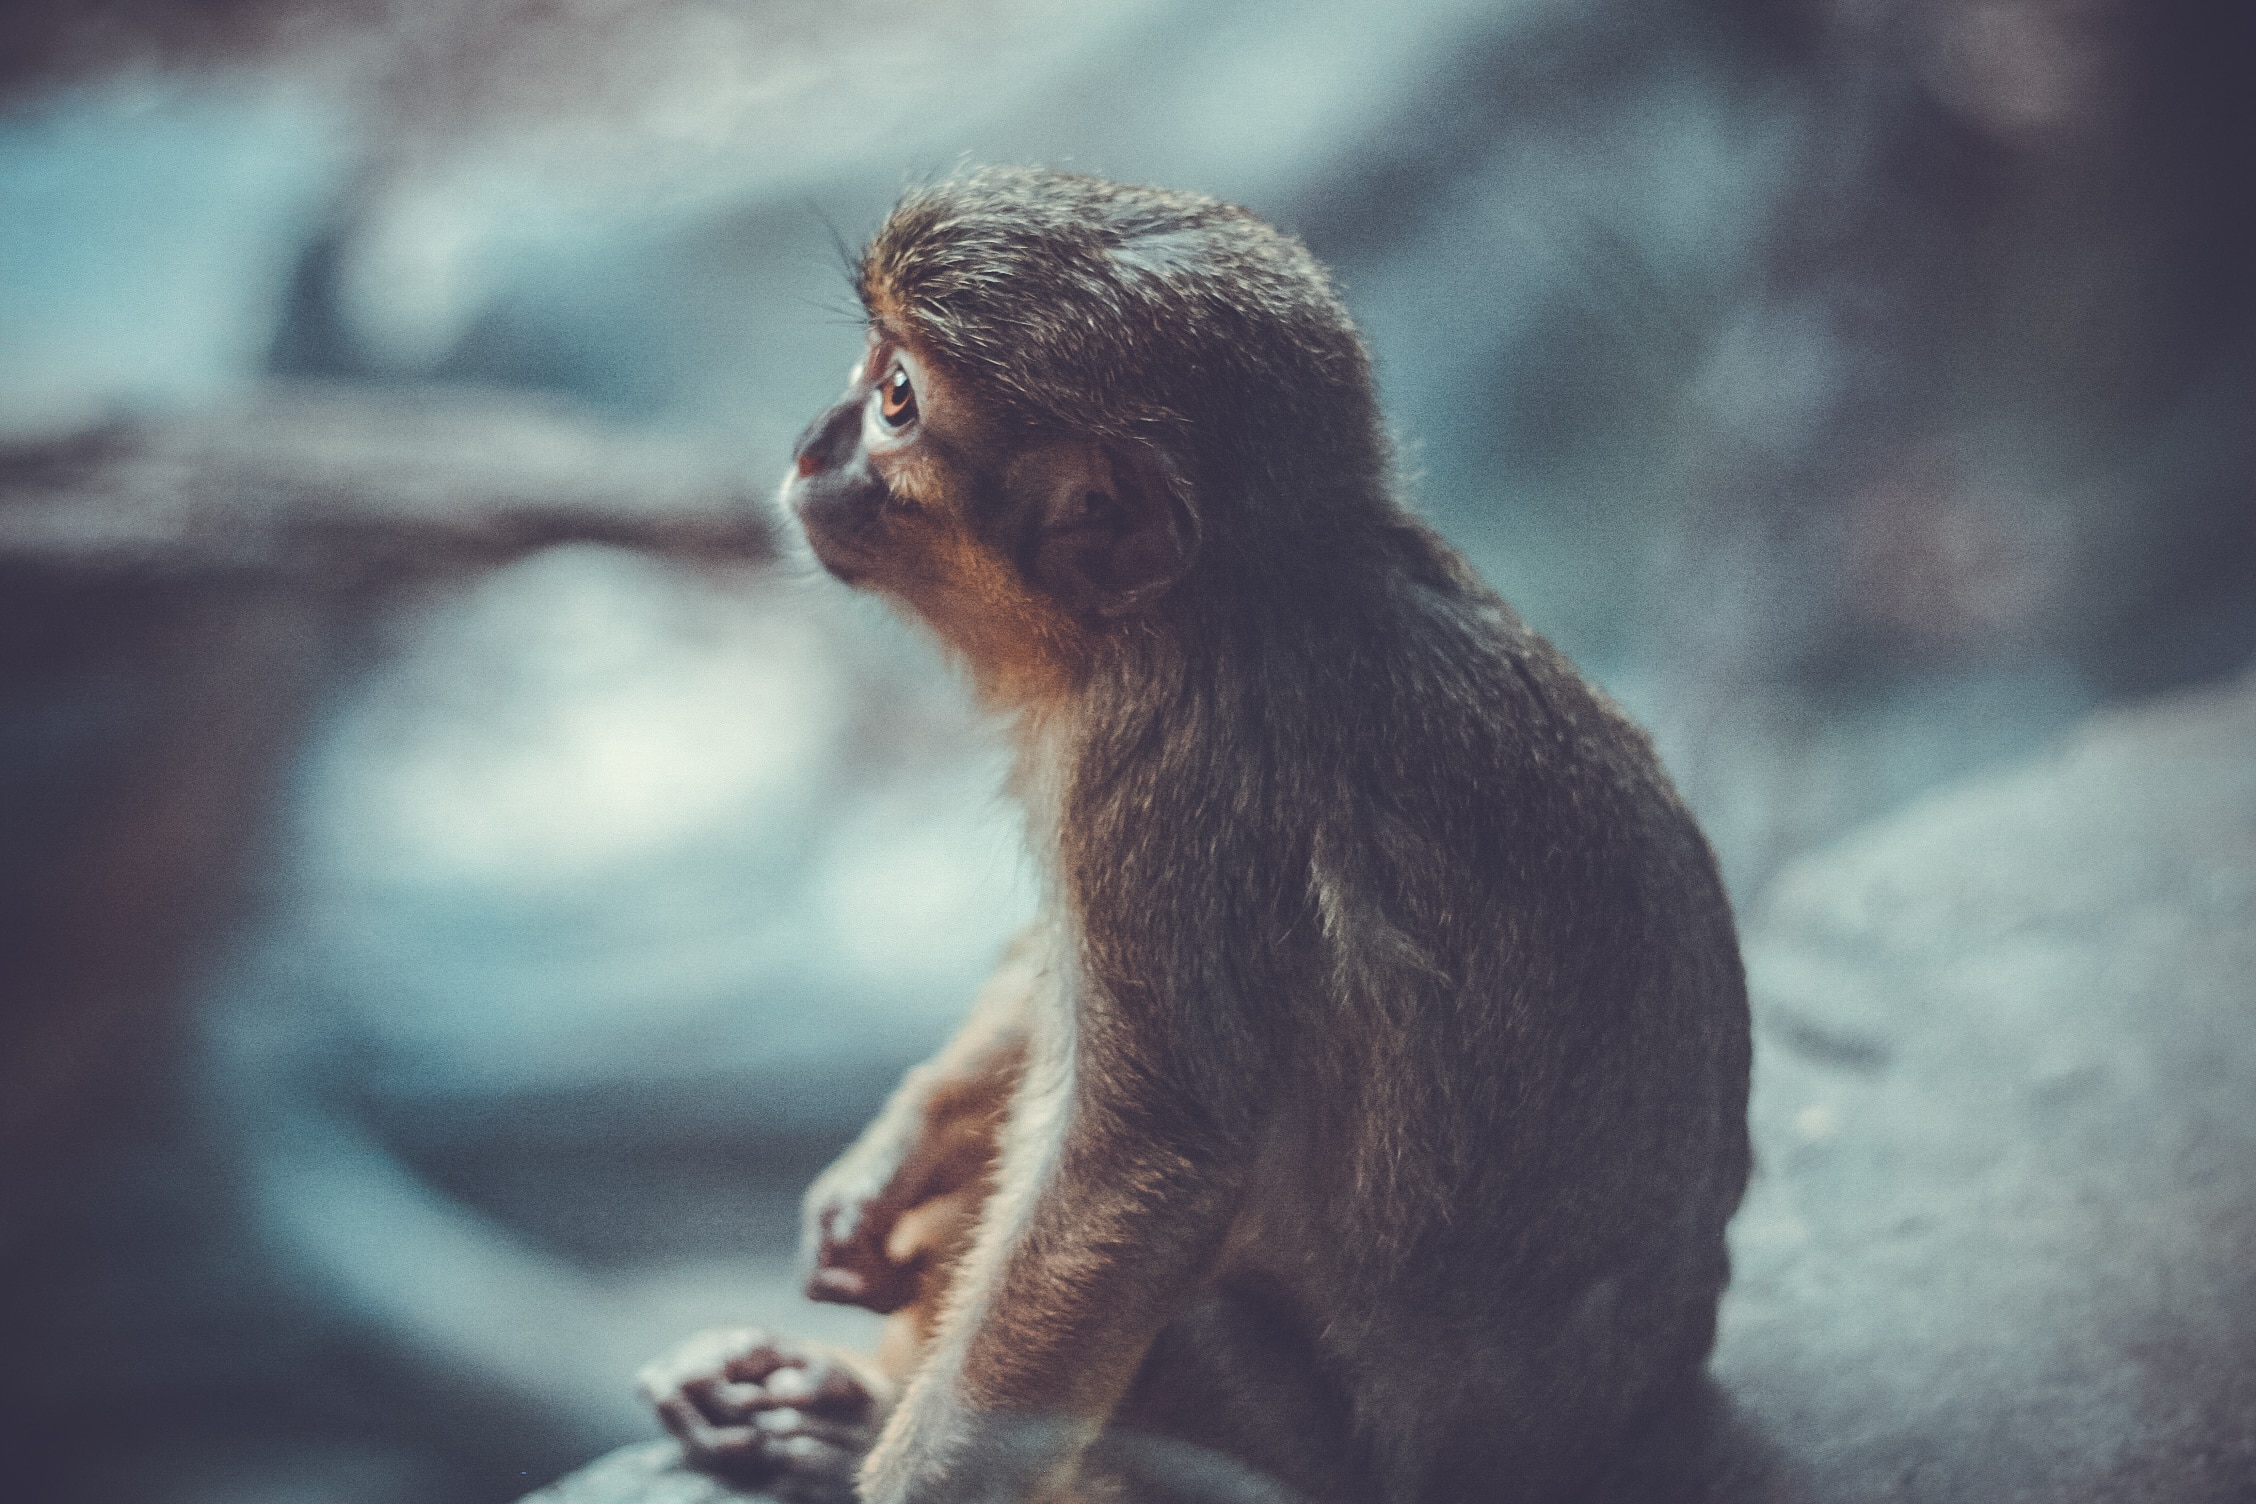 gray monkey sitting on brown surface